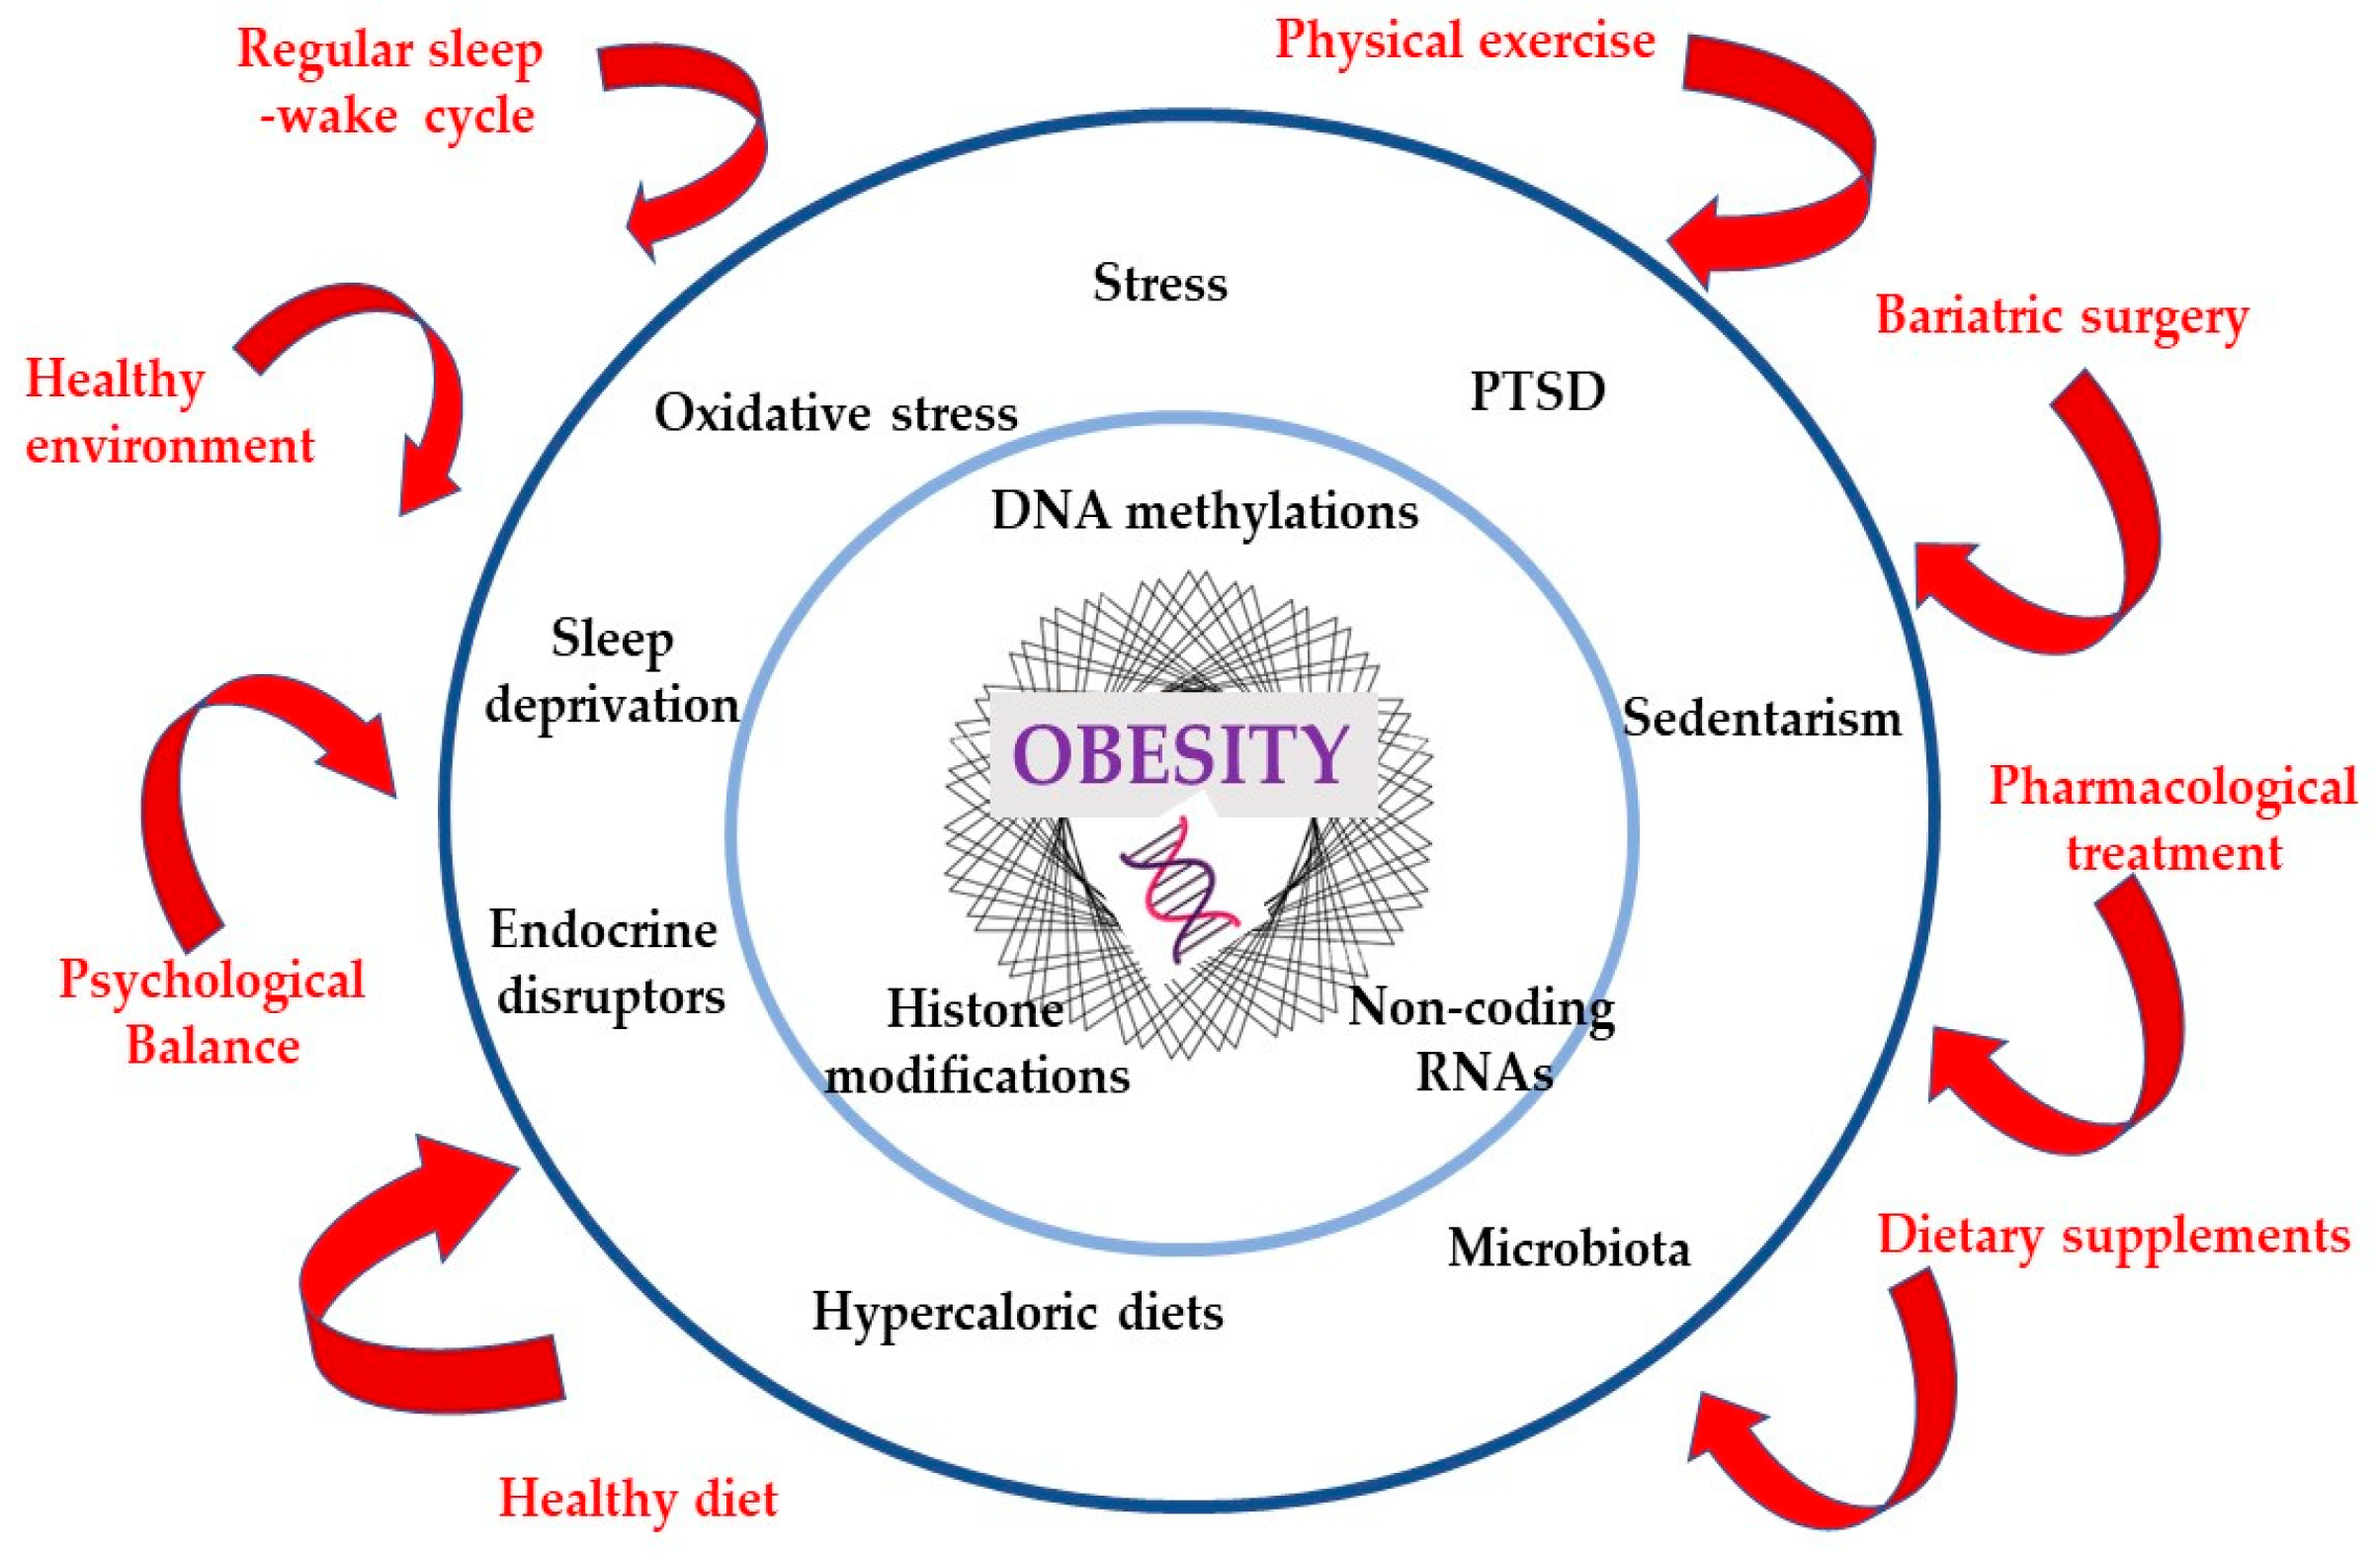 The Link Between Obesity and Urological Disorders